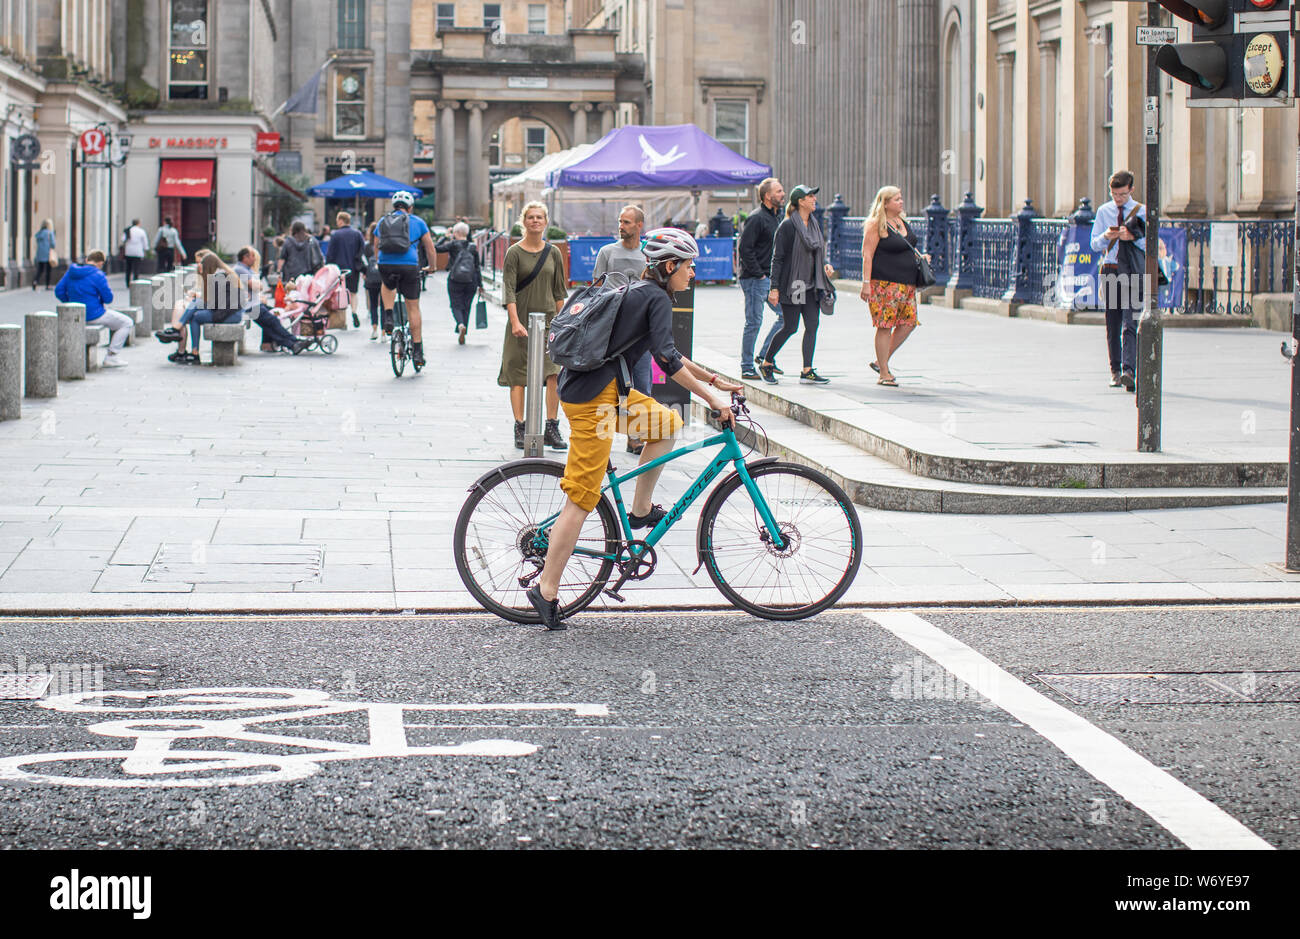 A woman cyclist commuter in central Glasgow cycles past a pedestrianized zone in the Merchants Quarter Stock Photo